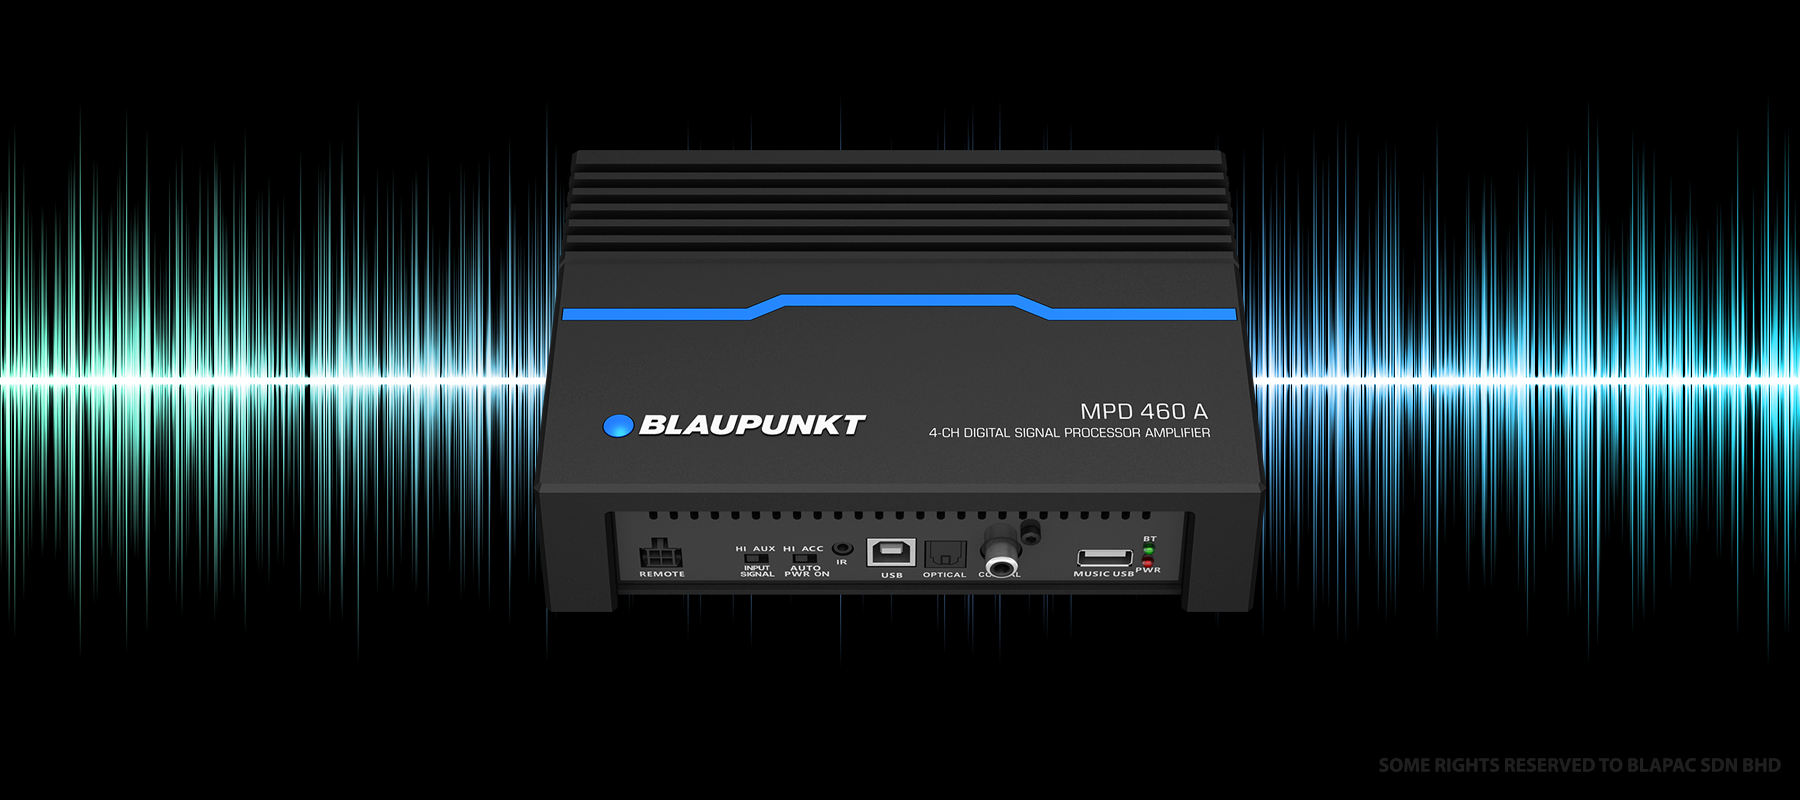 Blaupunkt Velocity Power Amplifier with DSP MPD 460 A